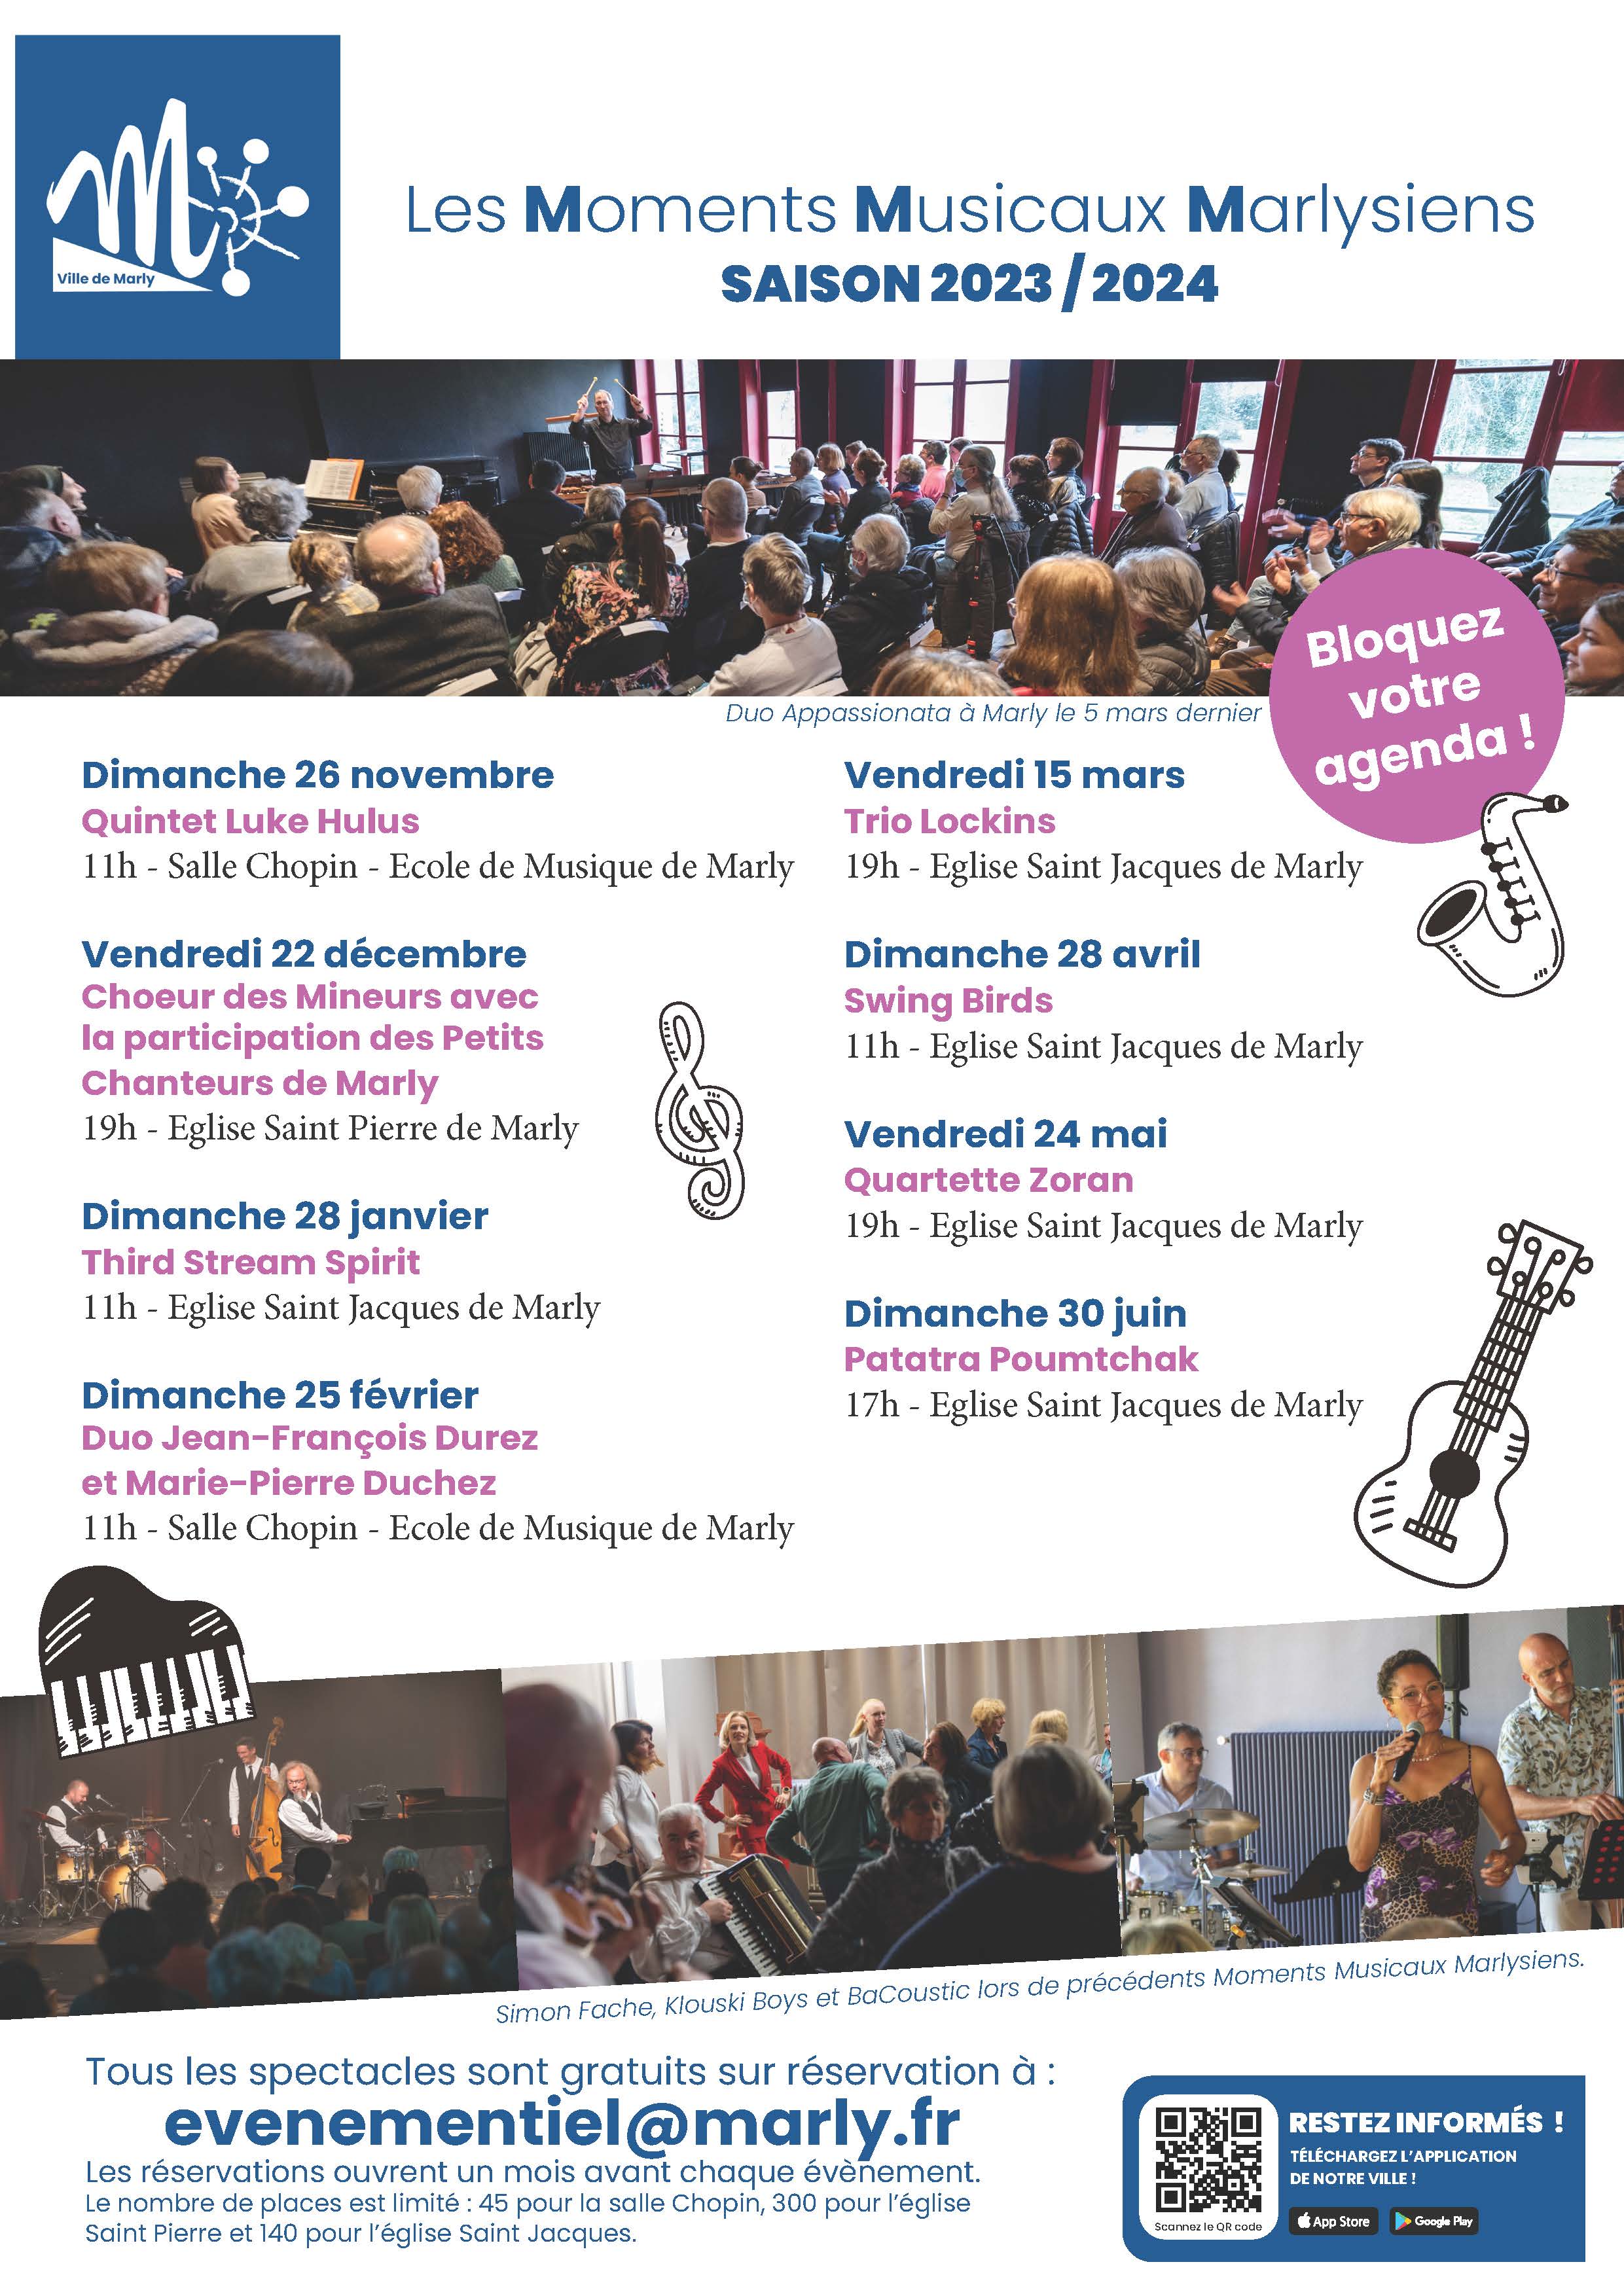 Programme des Moments Musicaux Marlysiens